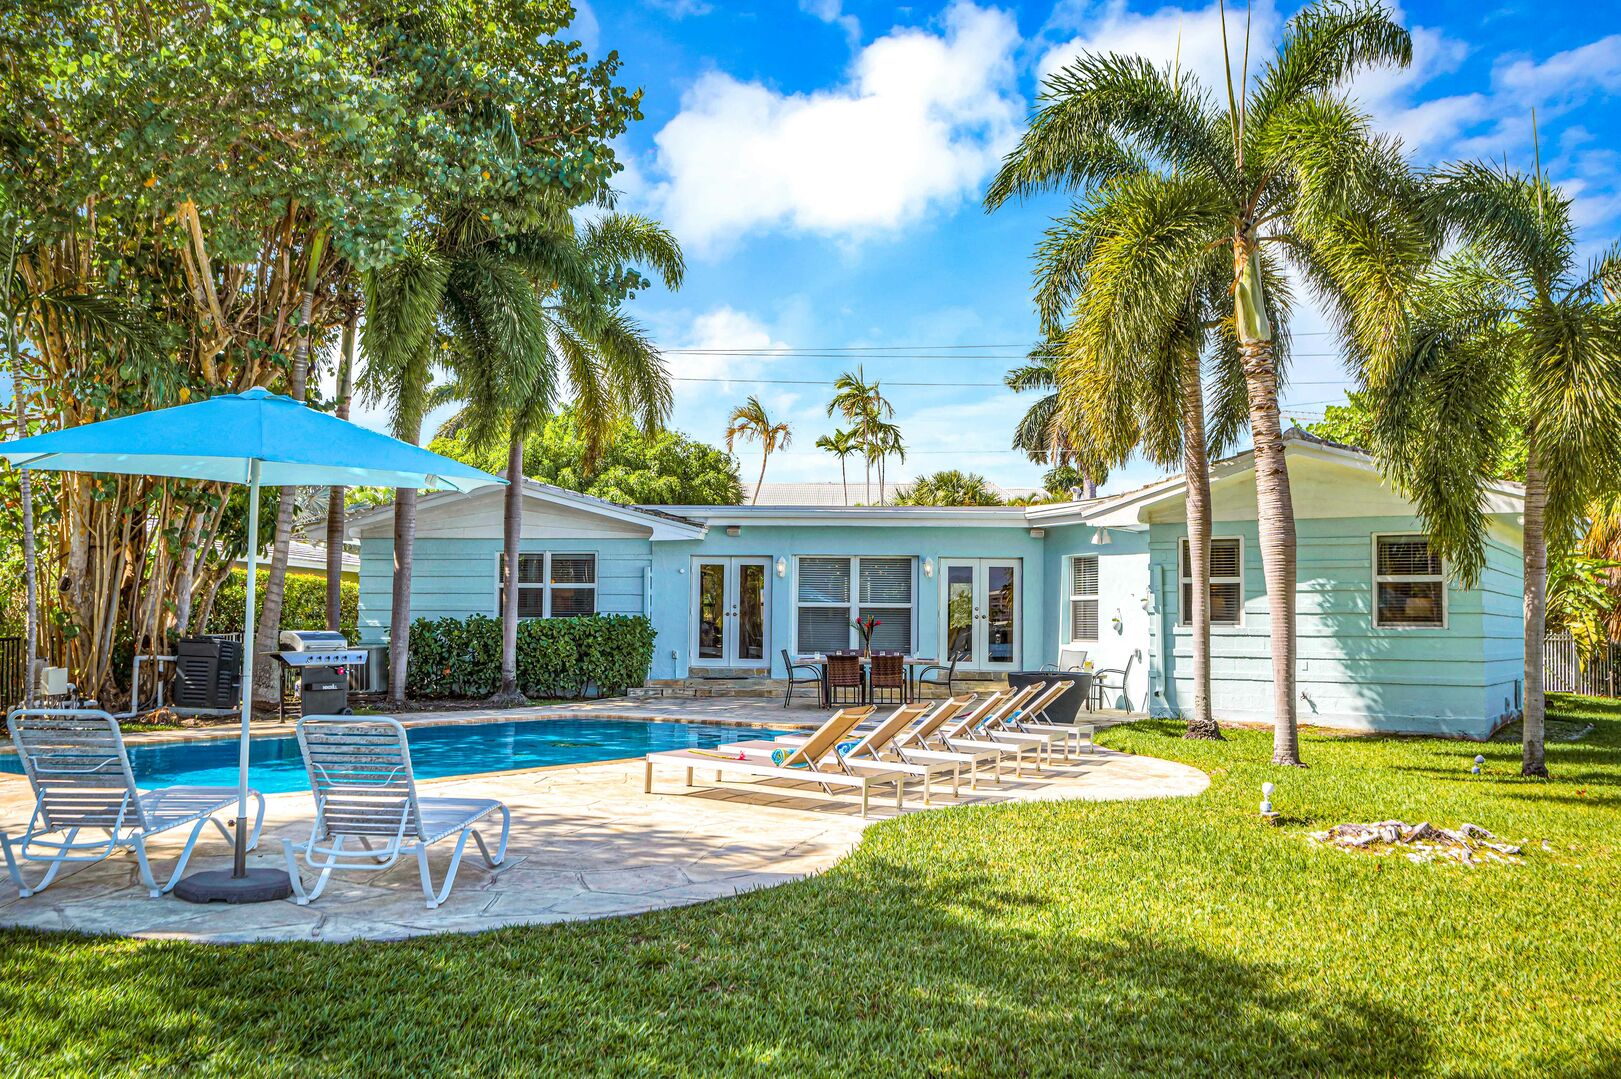 This quaint Floridian ranch style home features an ample garden with a heated pool and 180'' of waterfront.